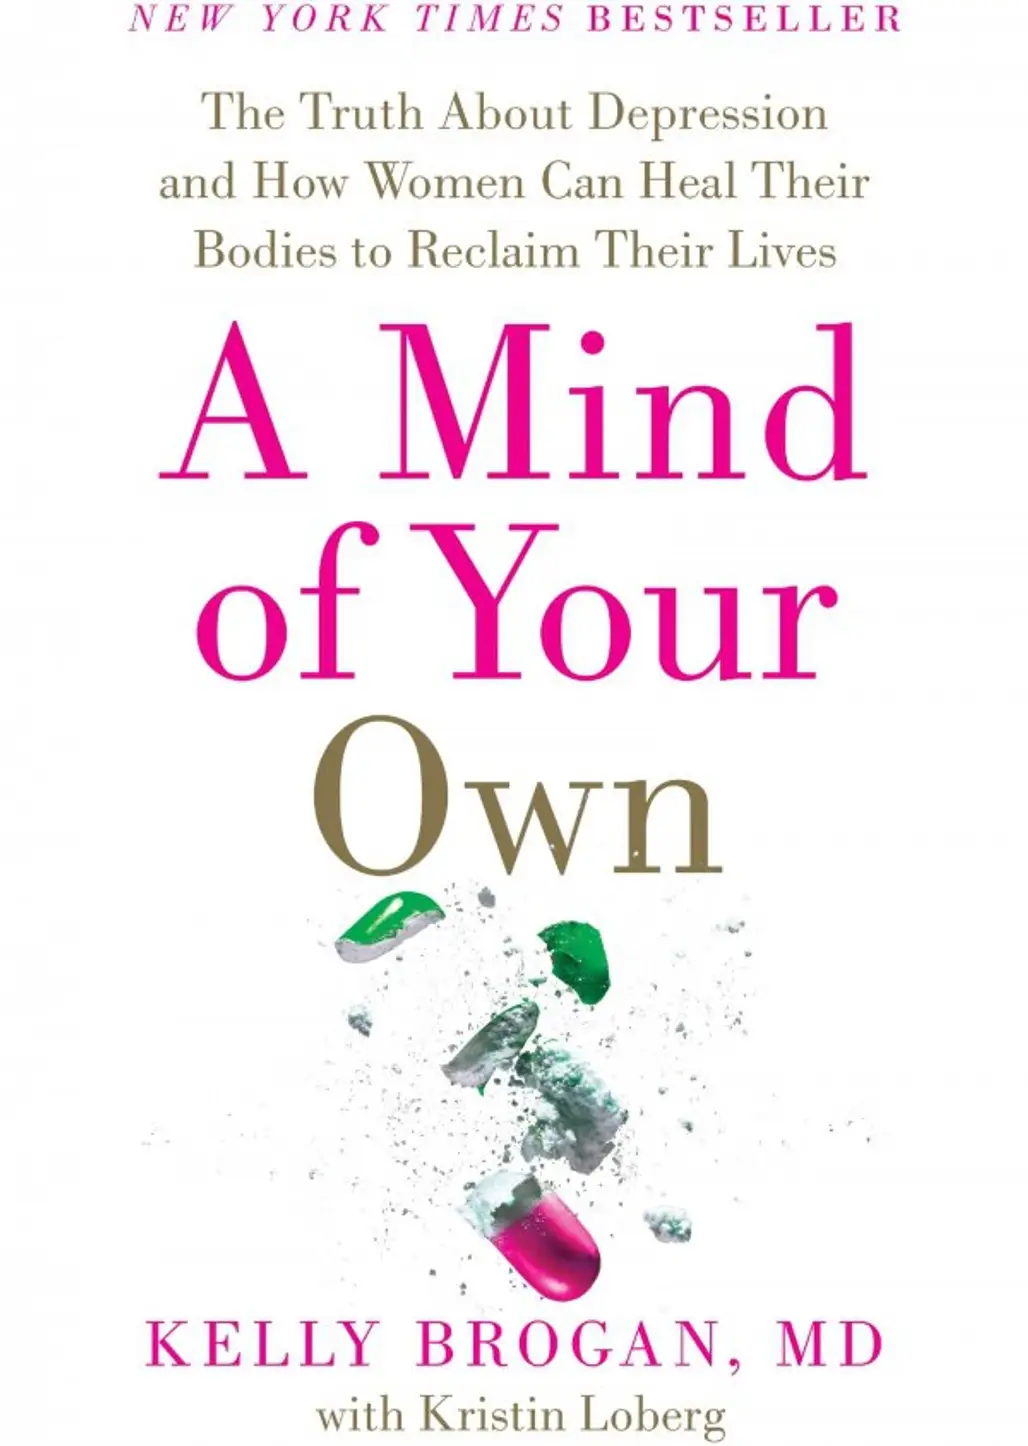 A Mind of Your Own by Kelly Brogan